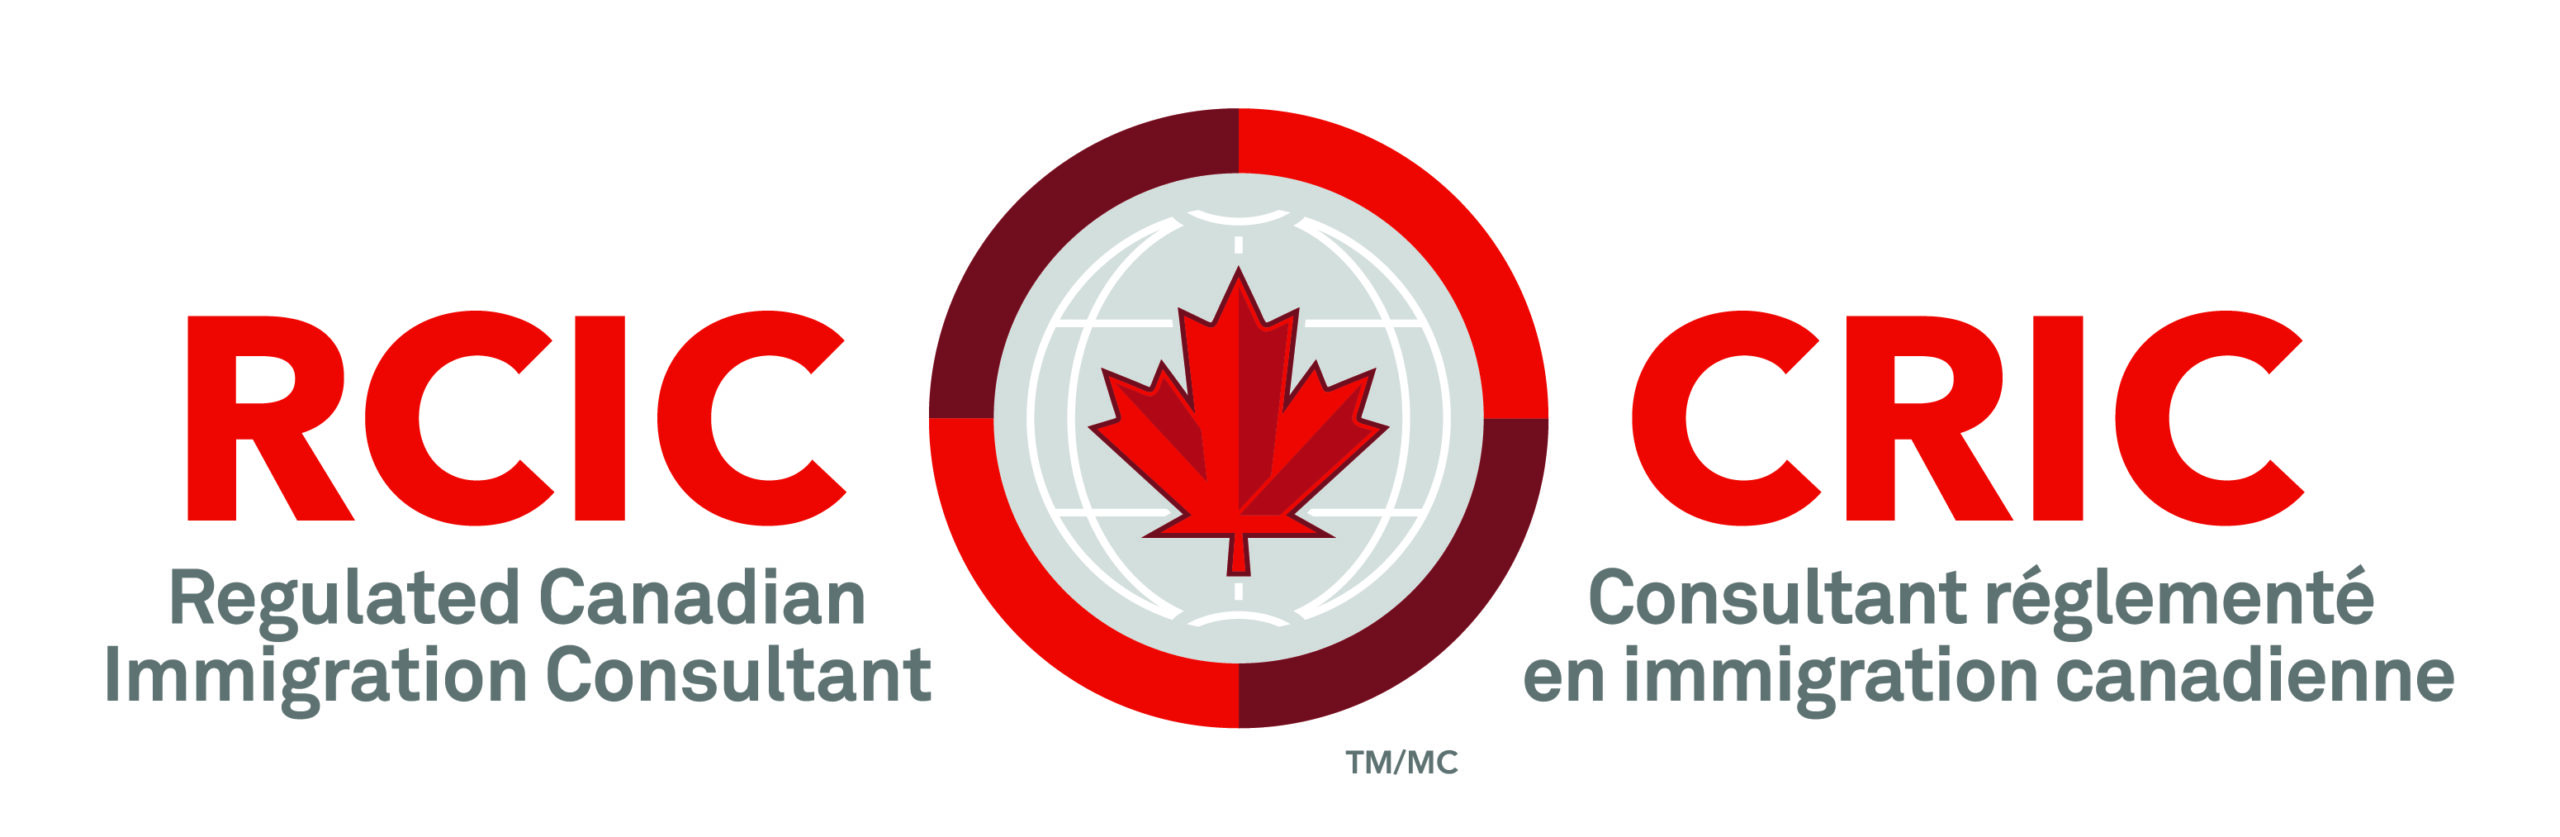 SKO Canada has an agreement with RCIC